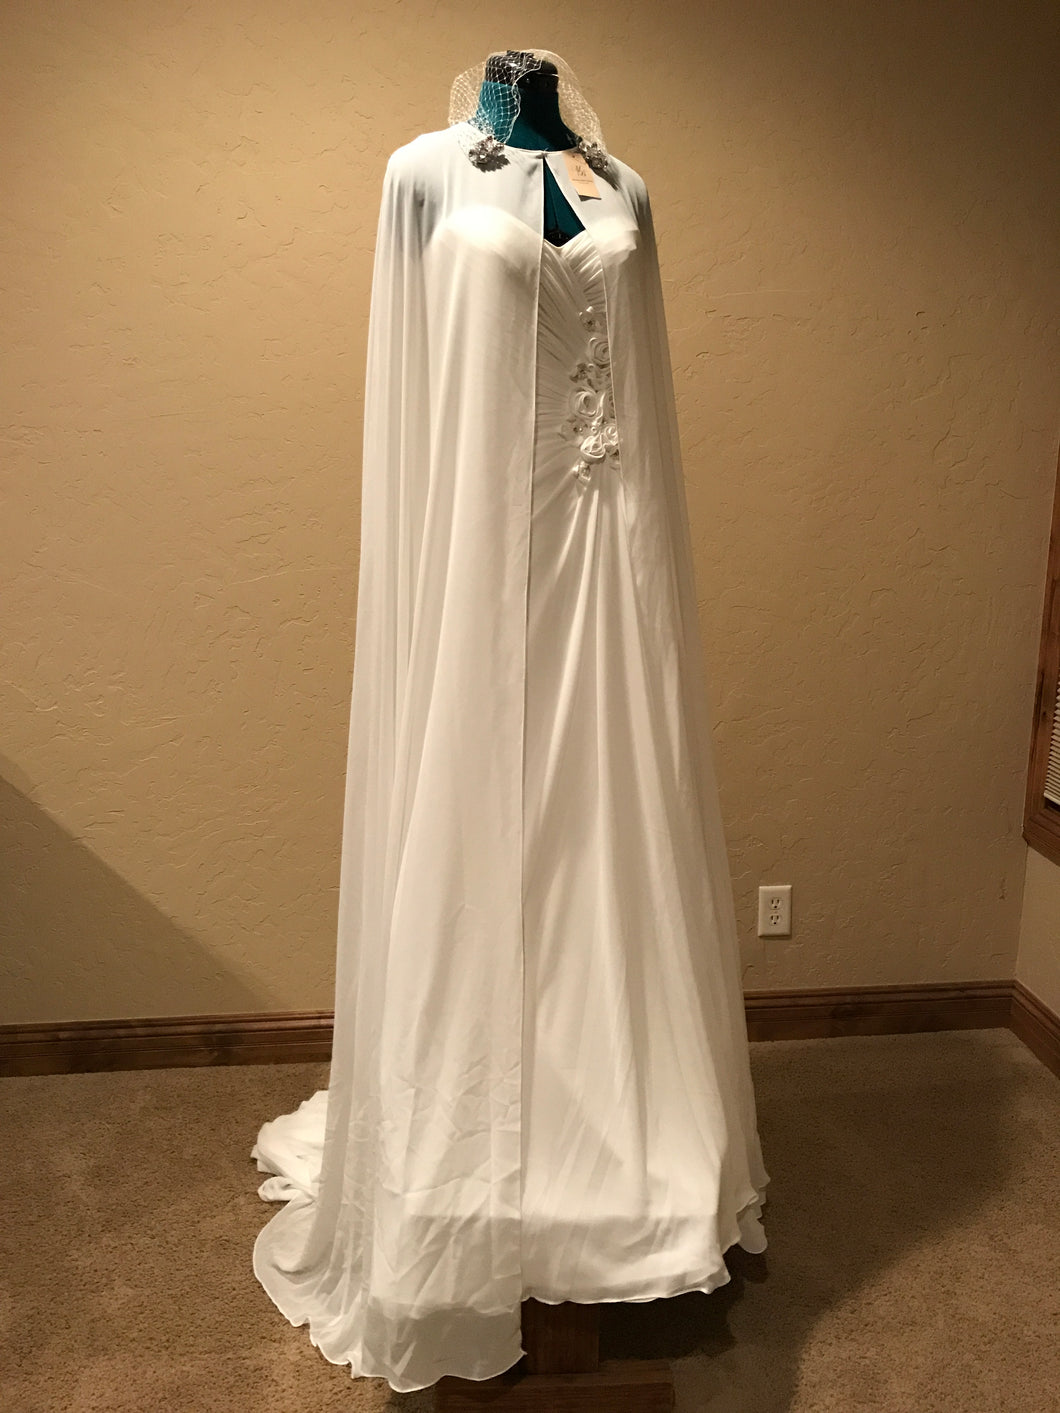 Maggie Sottero 'Zabrina' size 8 new wedding dress front view on mannequin